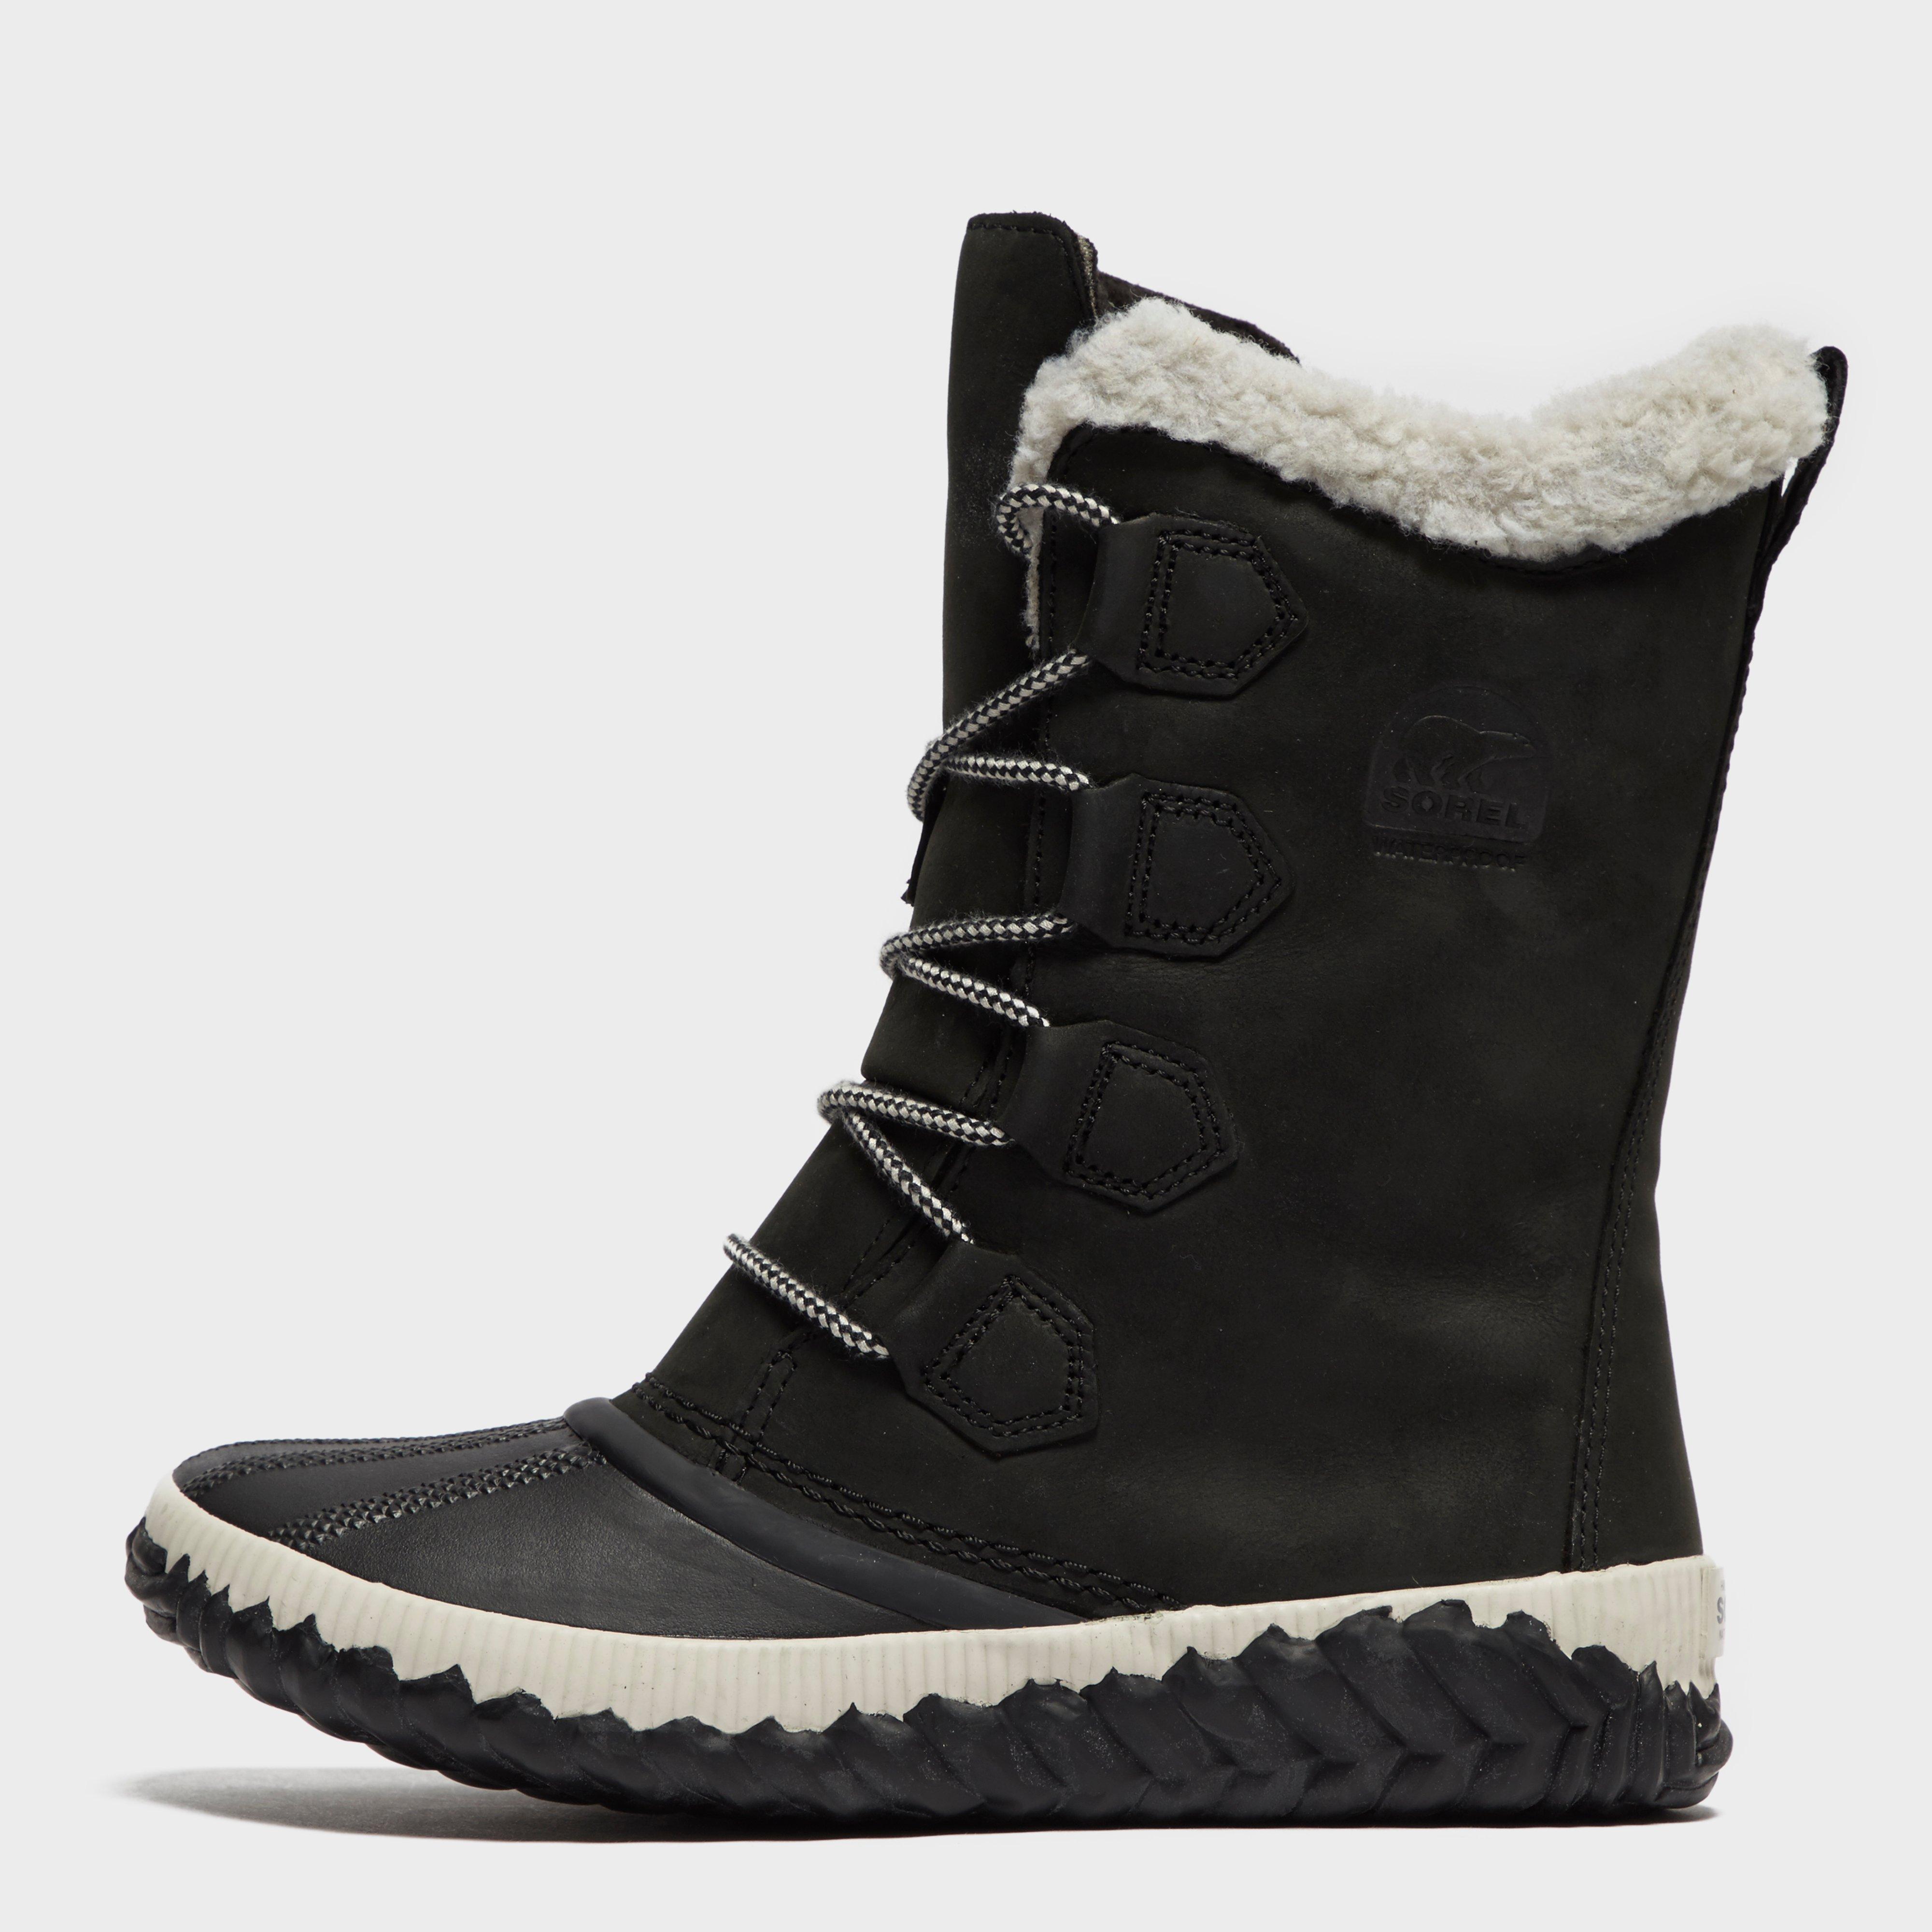 sorel women's out n about